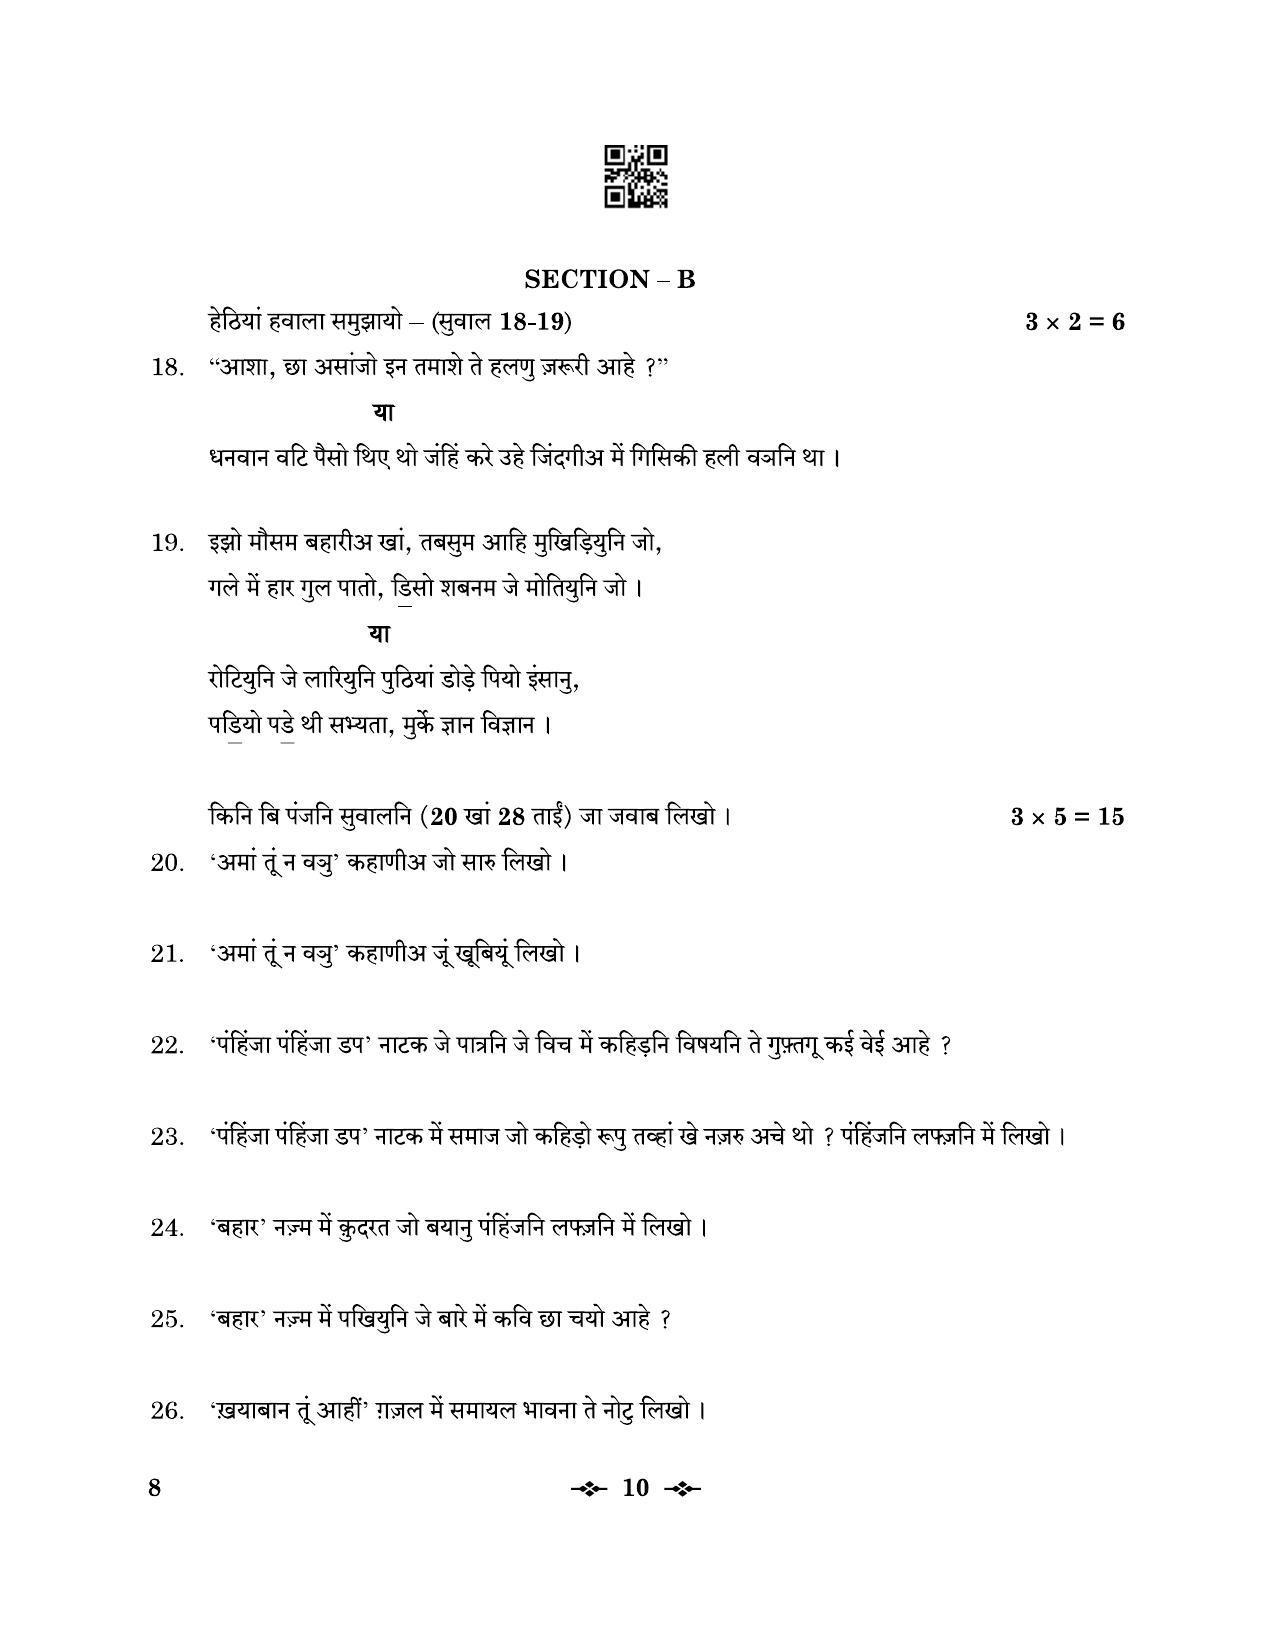 CBSE Class 12 8_Sindhi 2023 Question Paper - Page 10